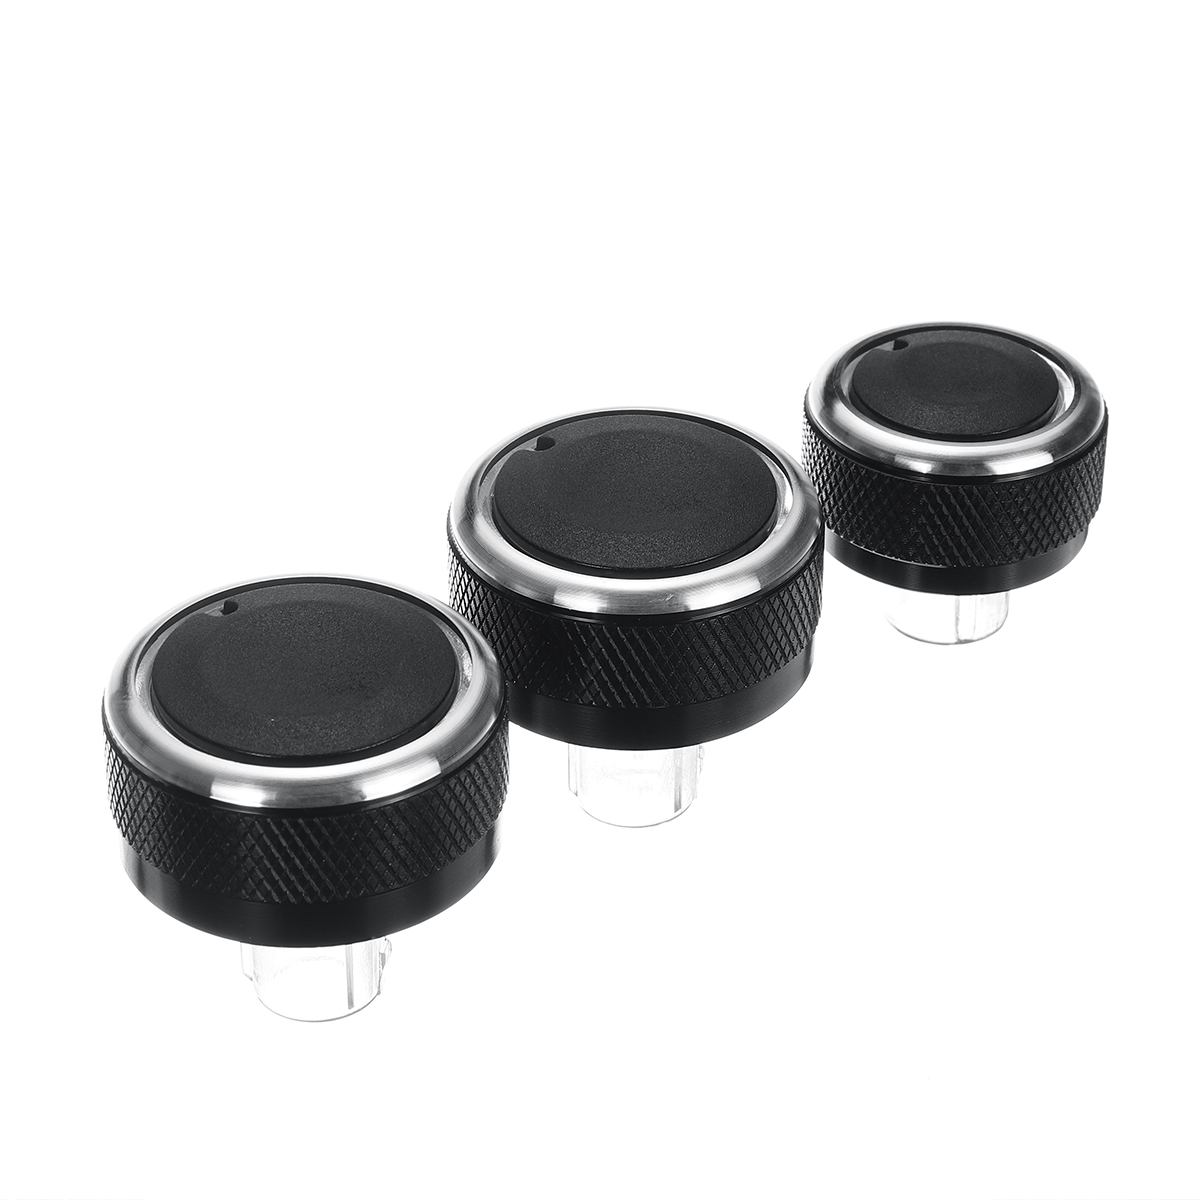 3Pcs Control Button Upgrade Kit for Jetta MK5 for Passat B6 for Octavia A5 A7